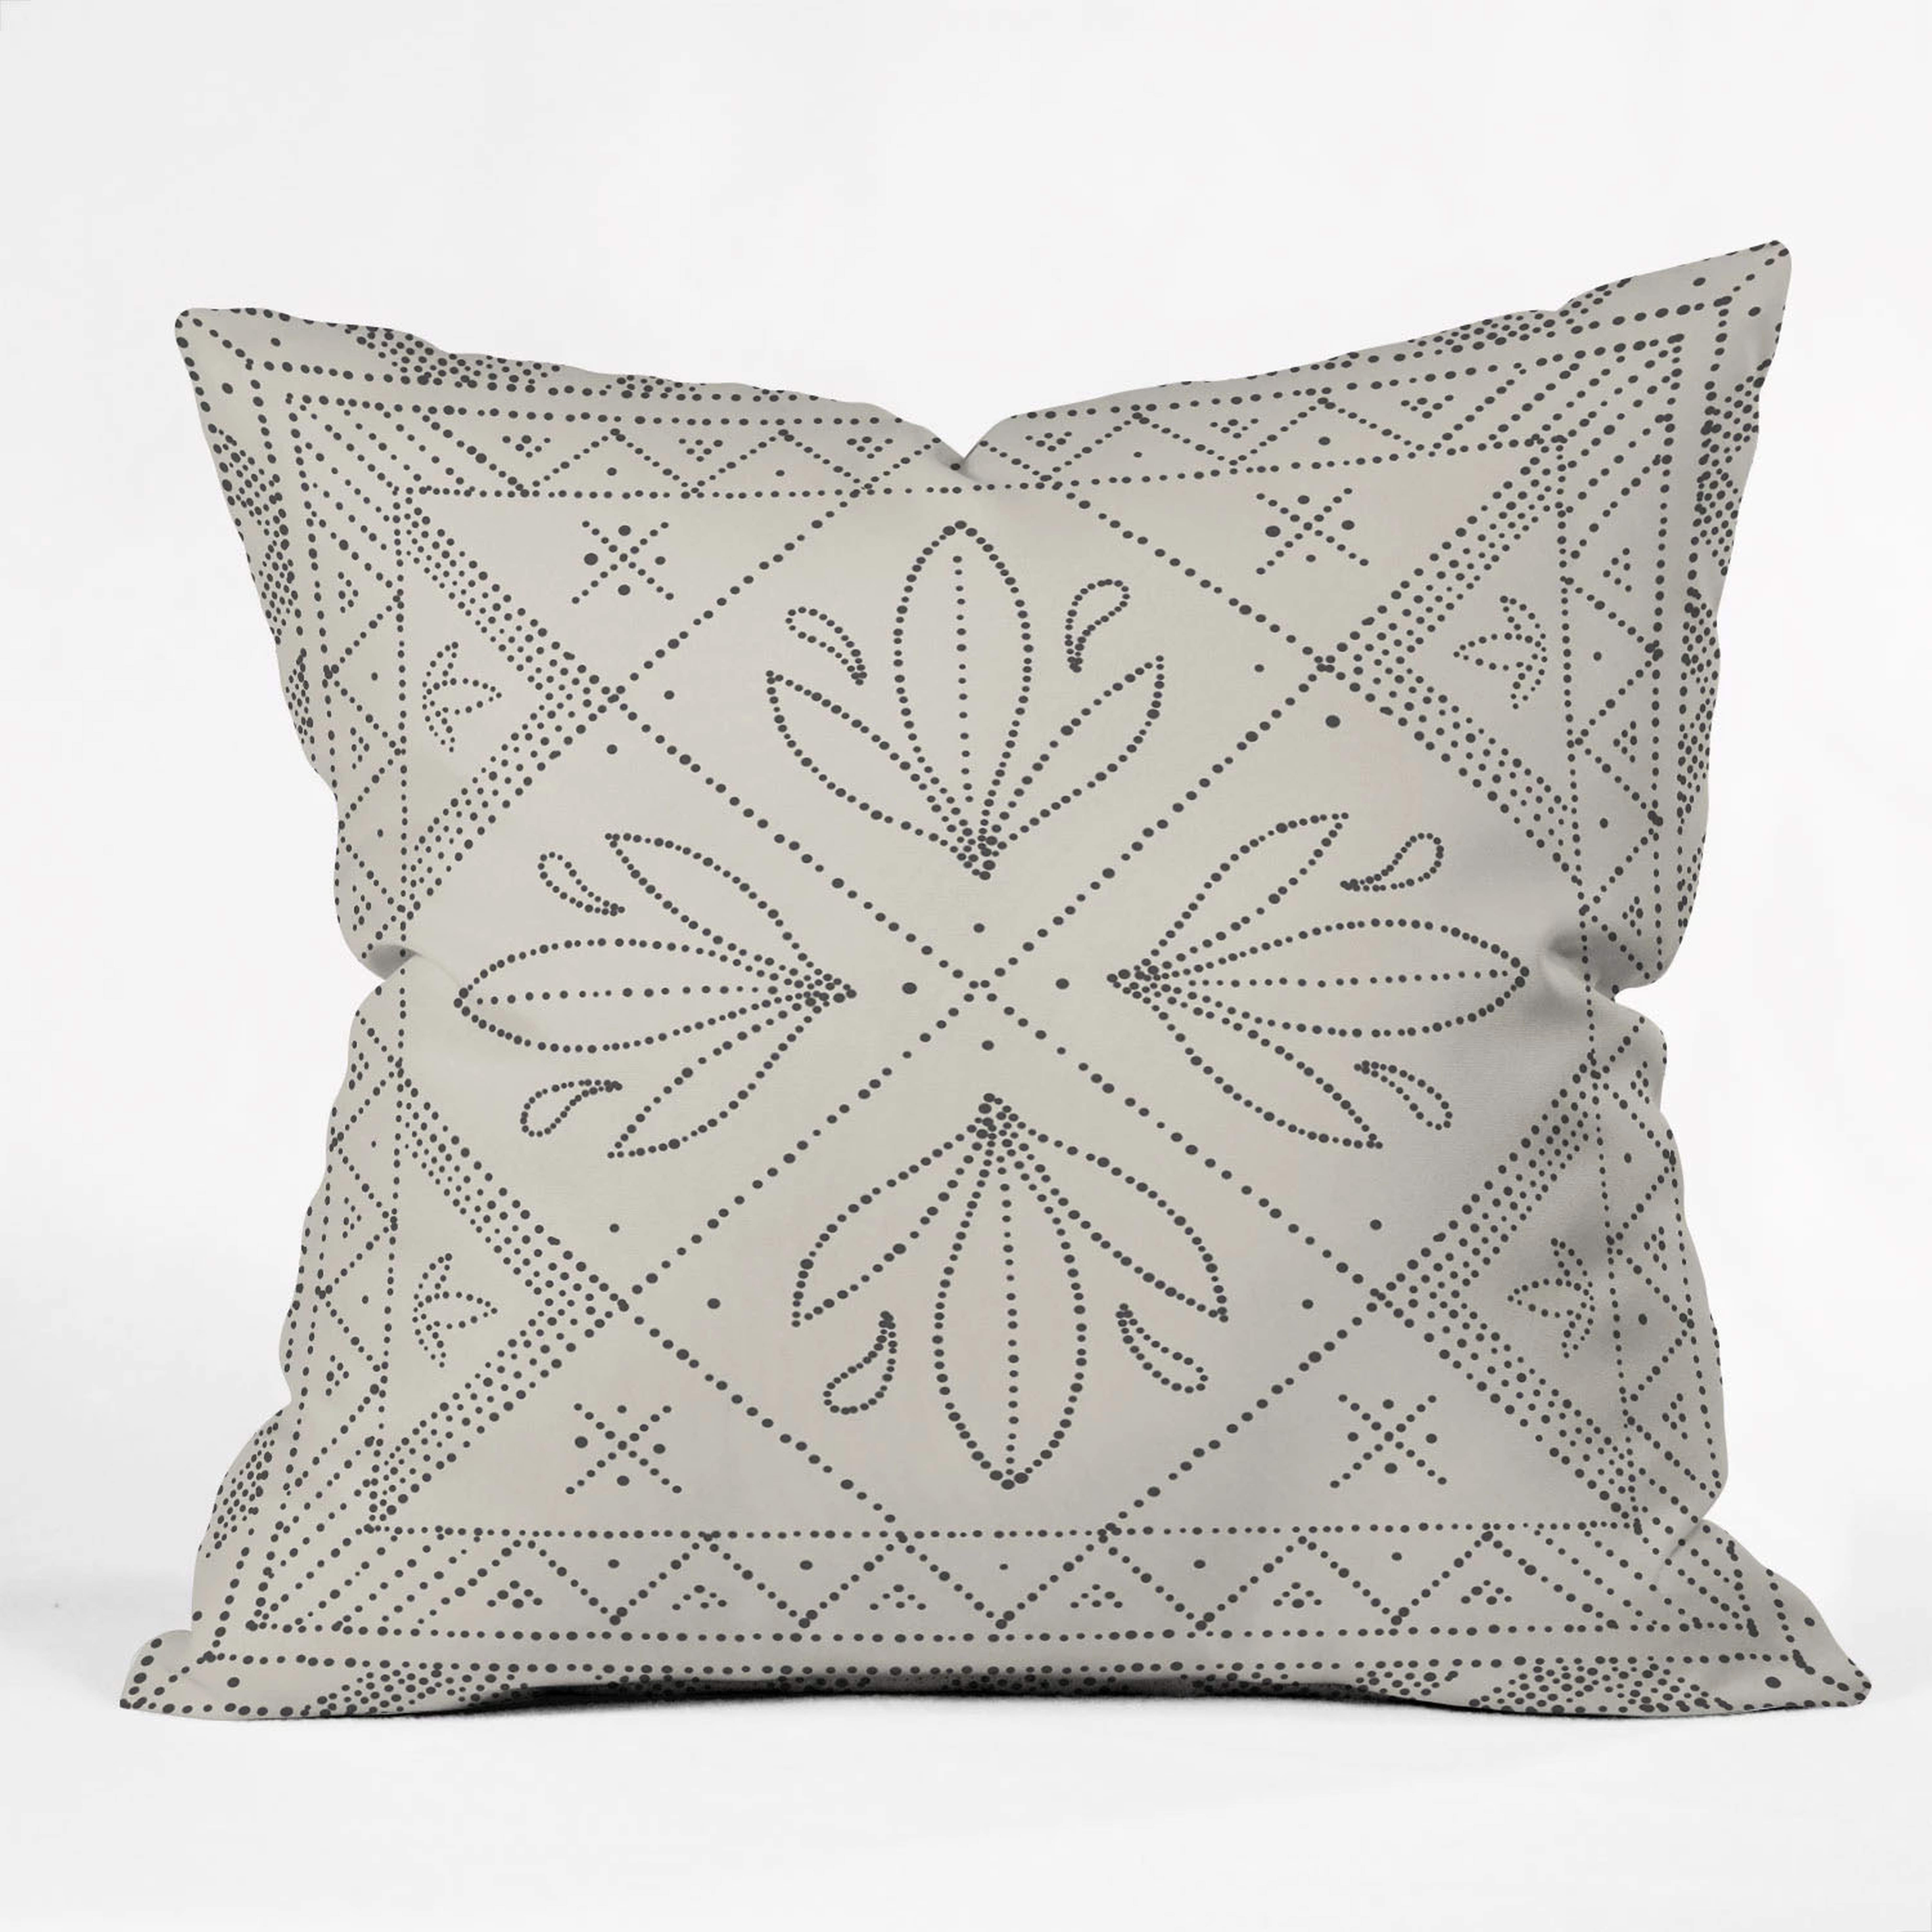 OUTDOOR THROW PILLOW JANELLE CREAM  BY IVETA ABOLINA - Wander Print Co.